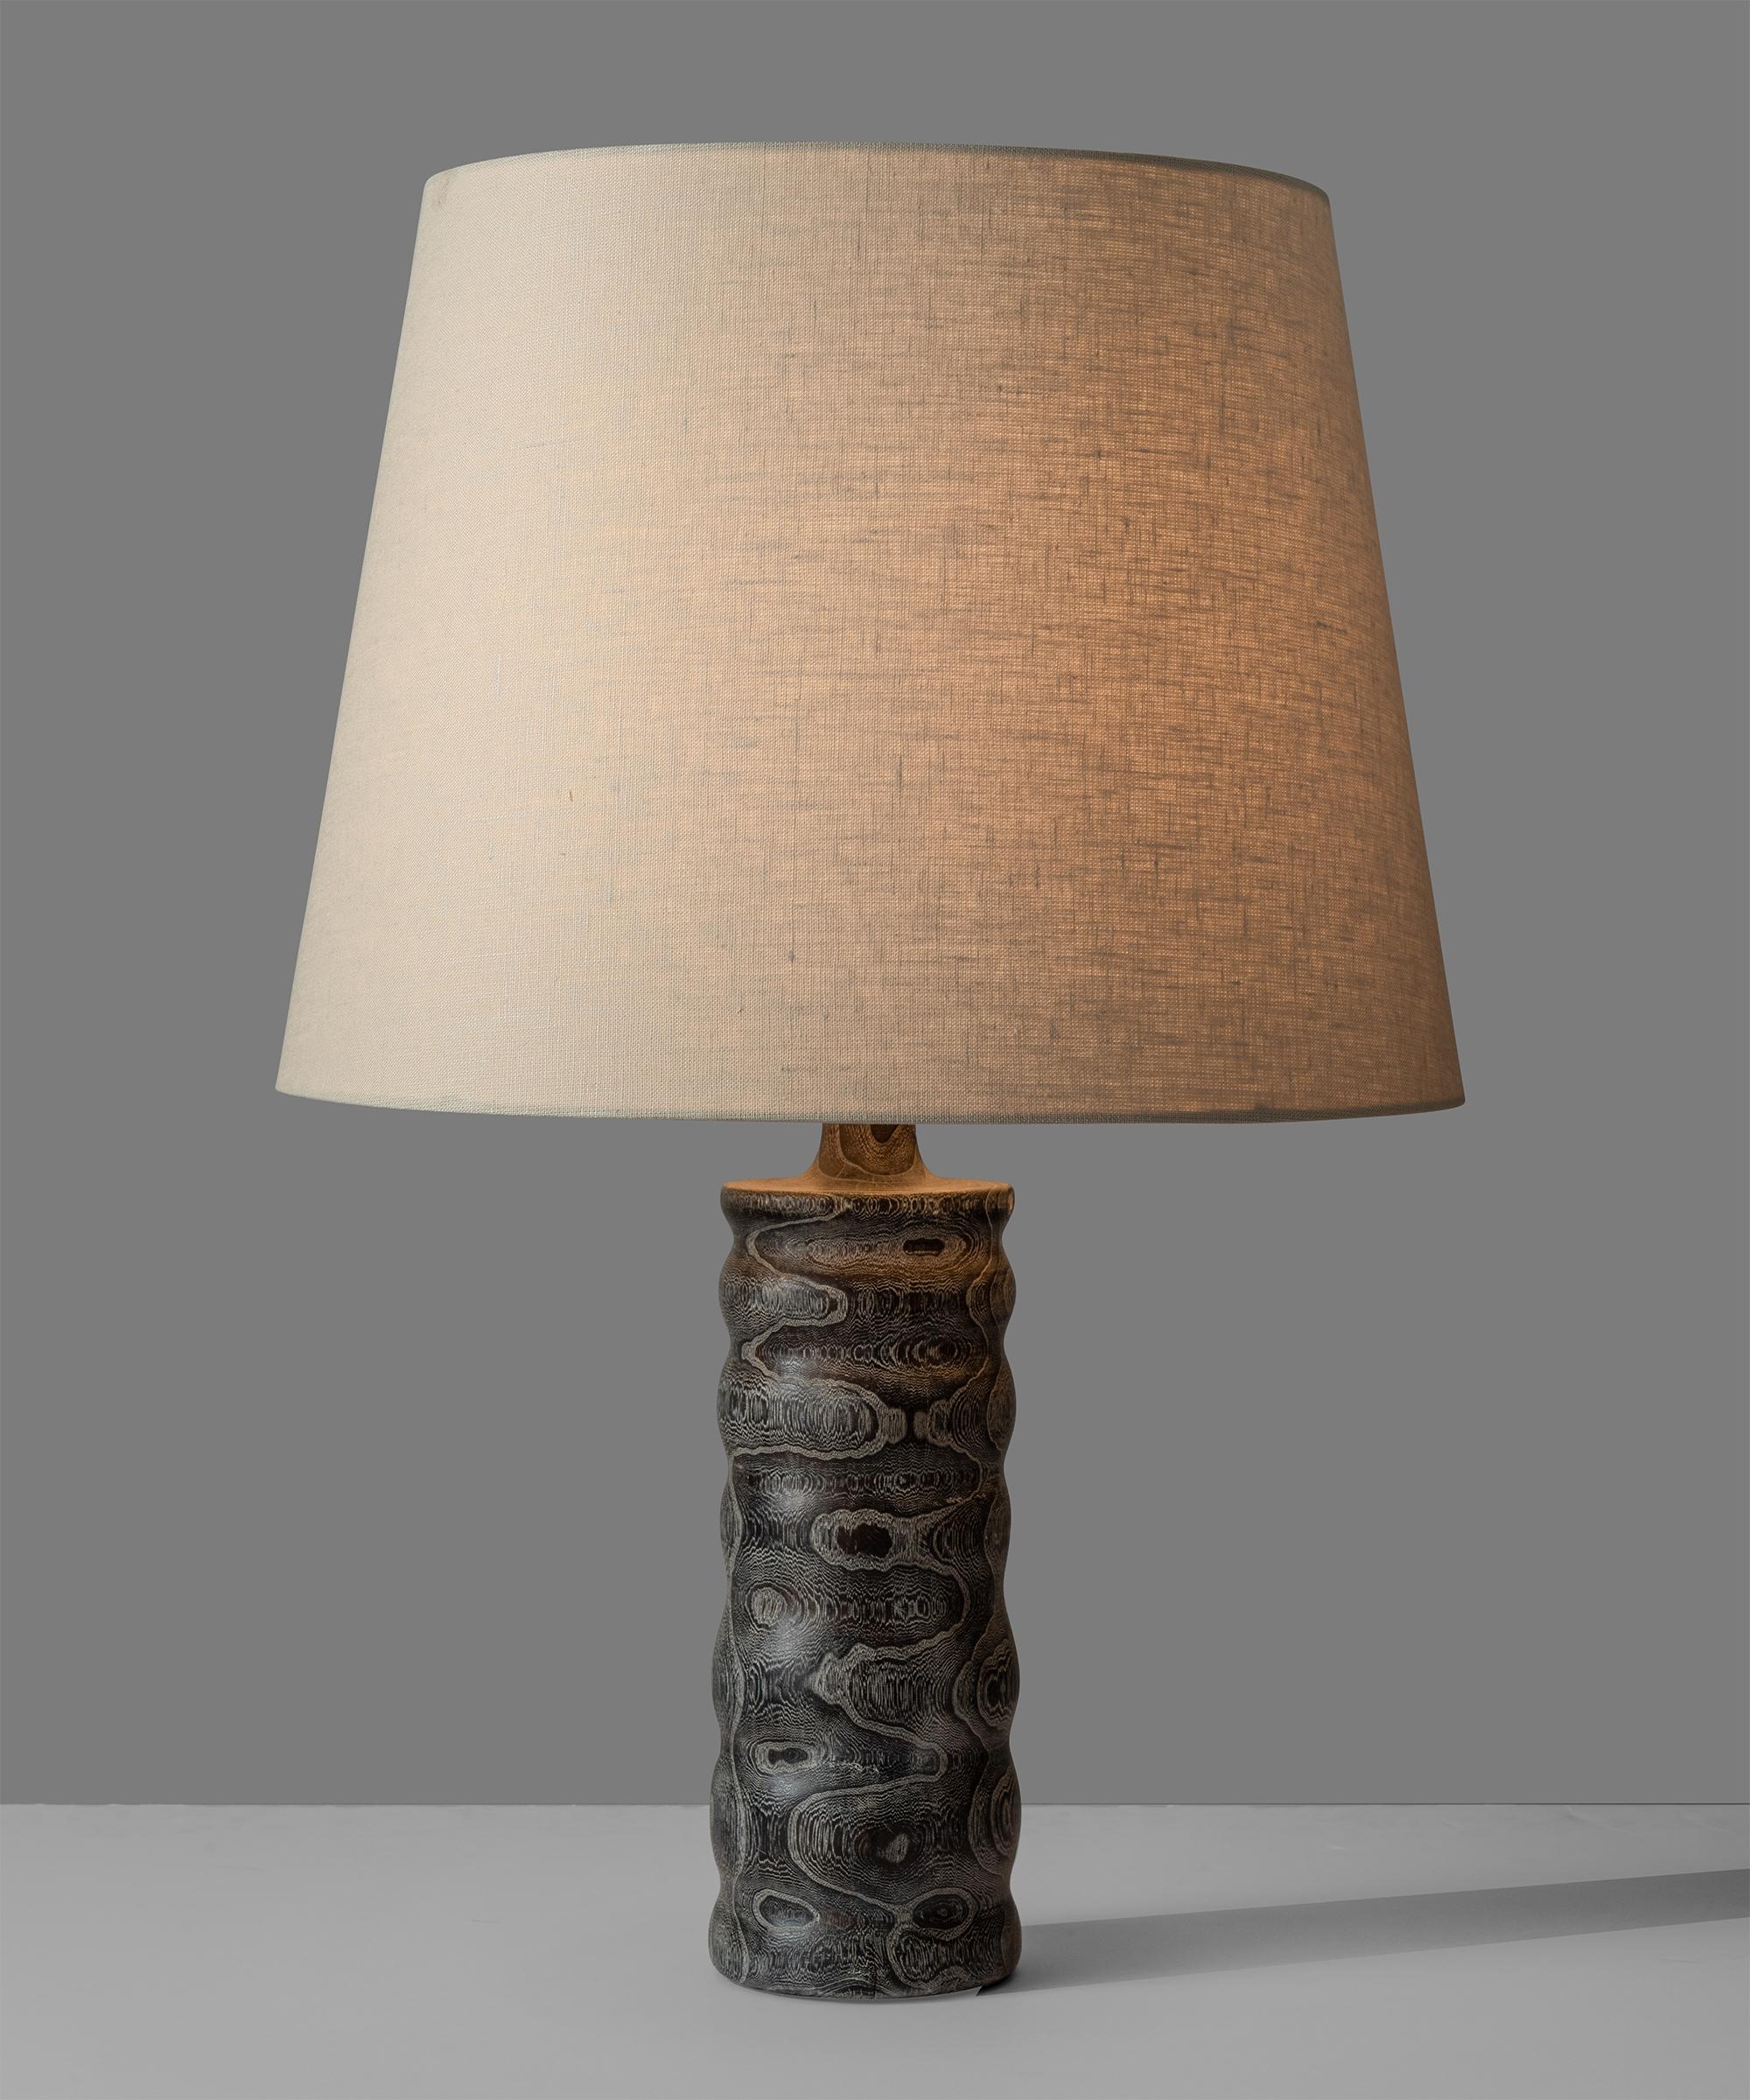 Stained wood table lamp, Sweden, circa 1960

Carved wooden base with intricate wood grain. New linen shade.

